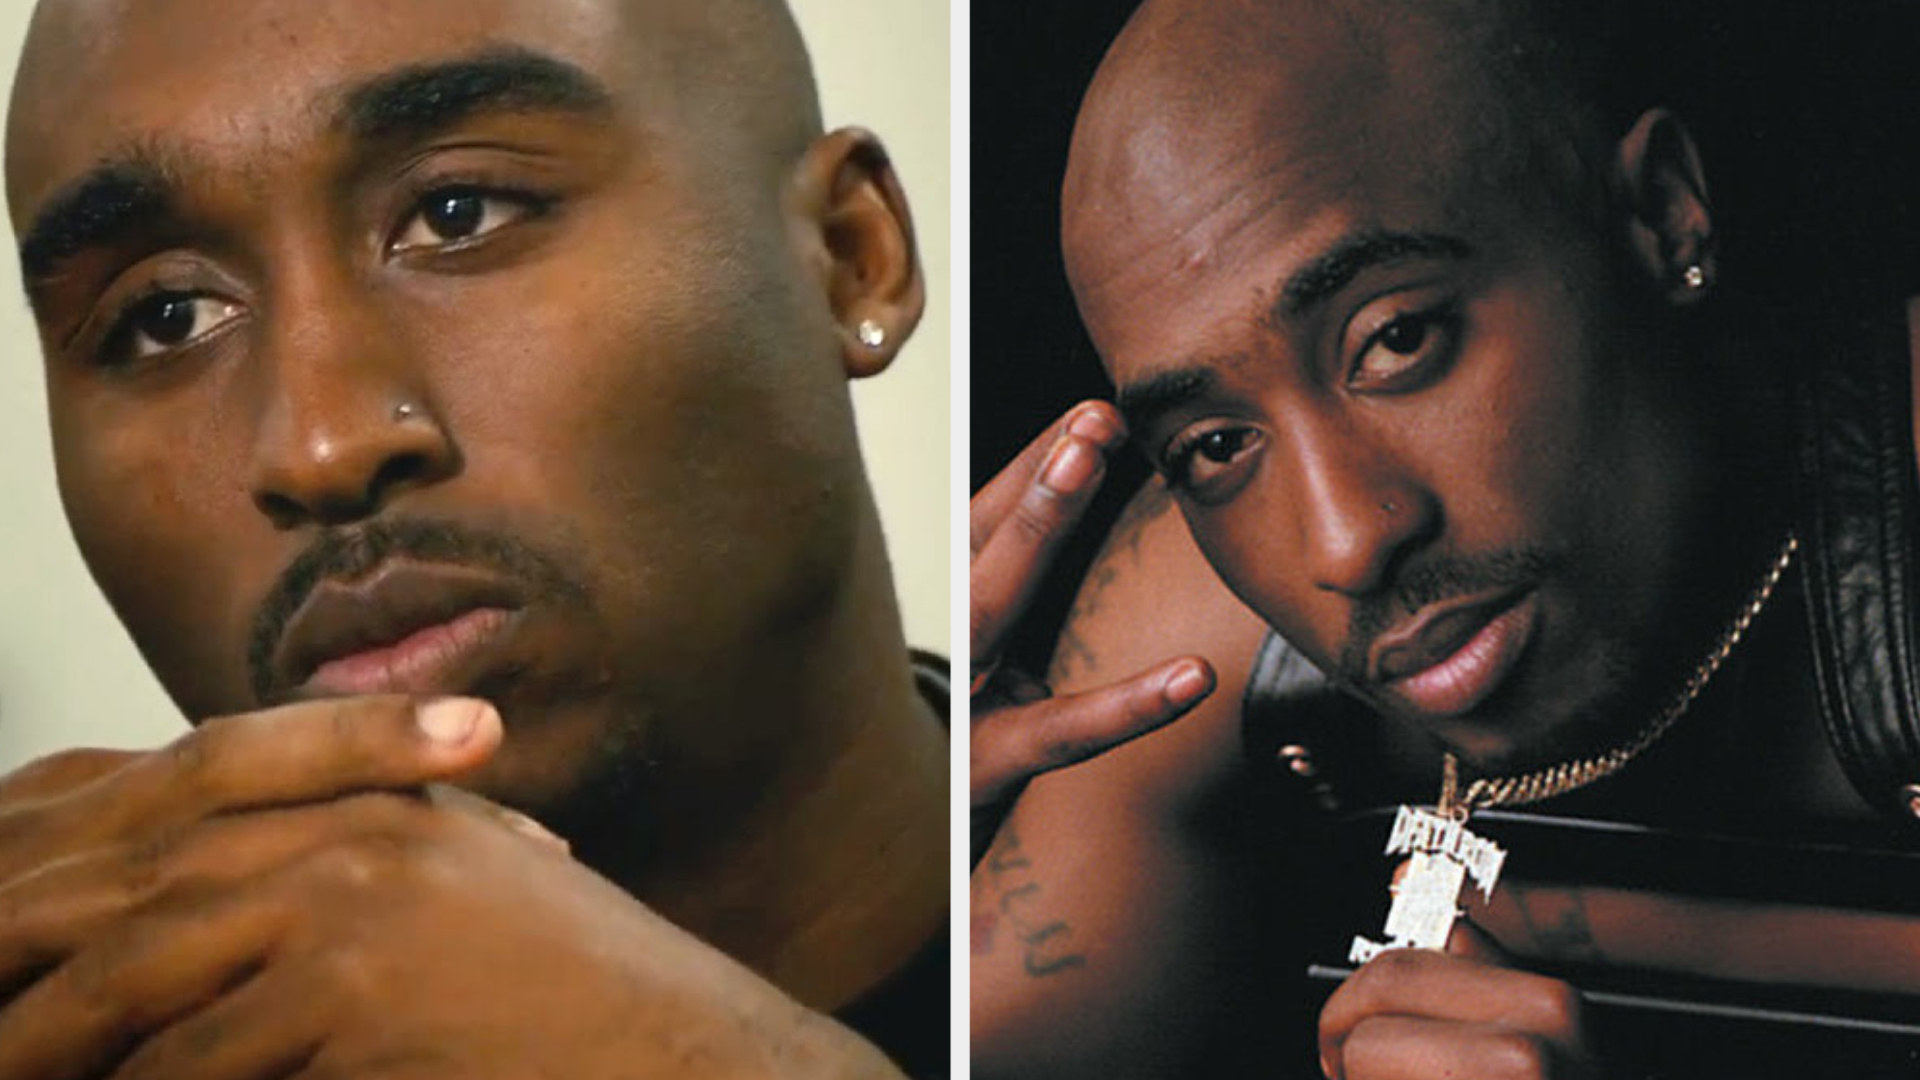 Demetrius Shipp Jr. as Tupac Shakur, in jail and looking at someone in a serious manner, wearing a stud nose ring; Tupac Shakur posing in a playful/tough manner on the cover of his album, &quot;All Eyez on Me,&quot; wearing a stud nose ring and chain necklace